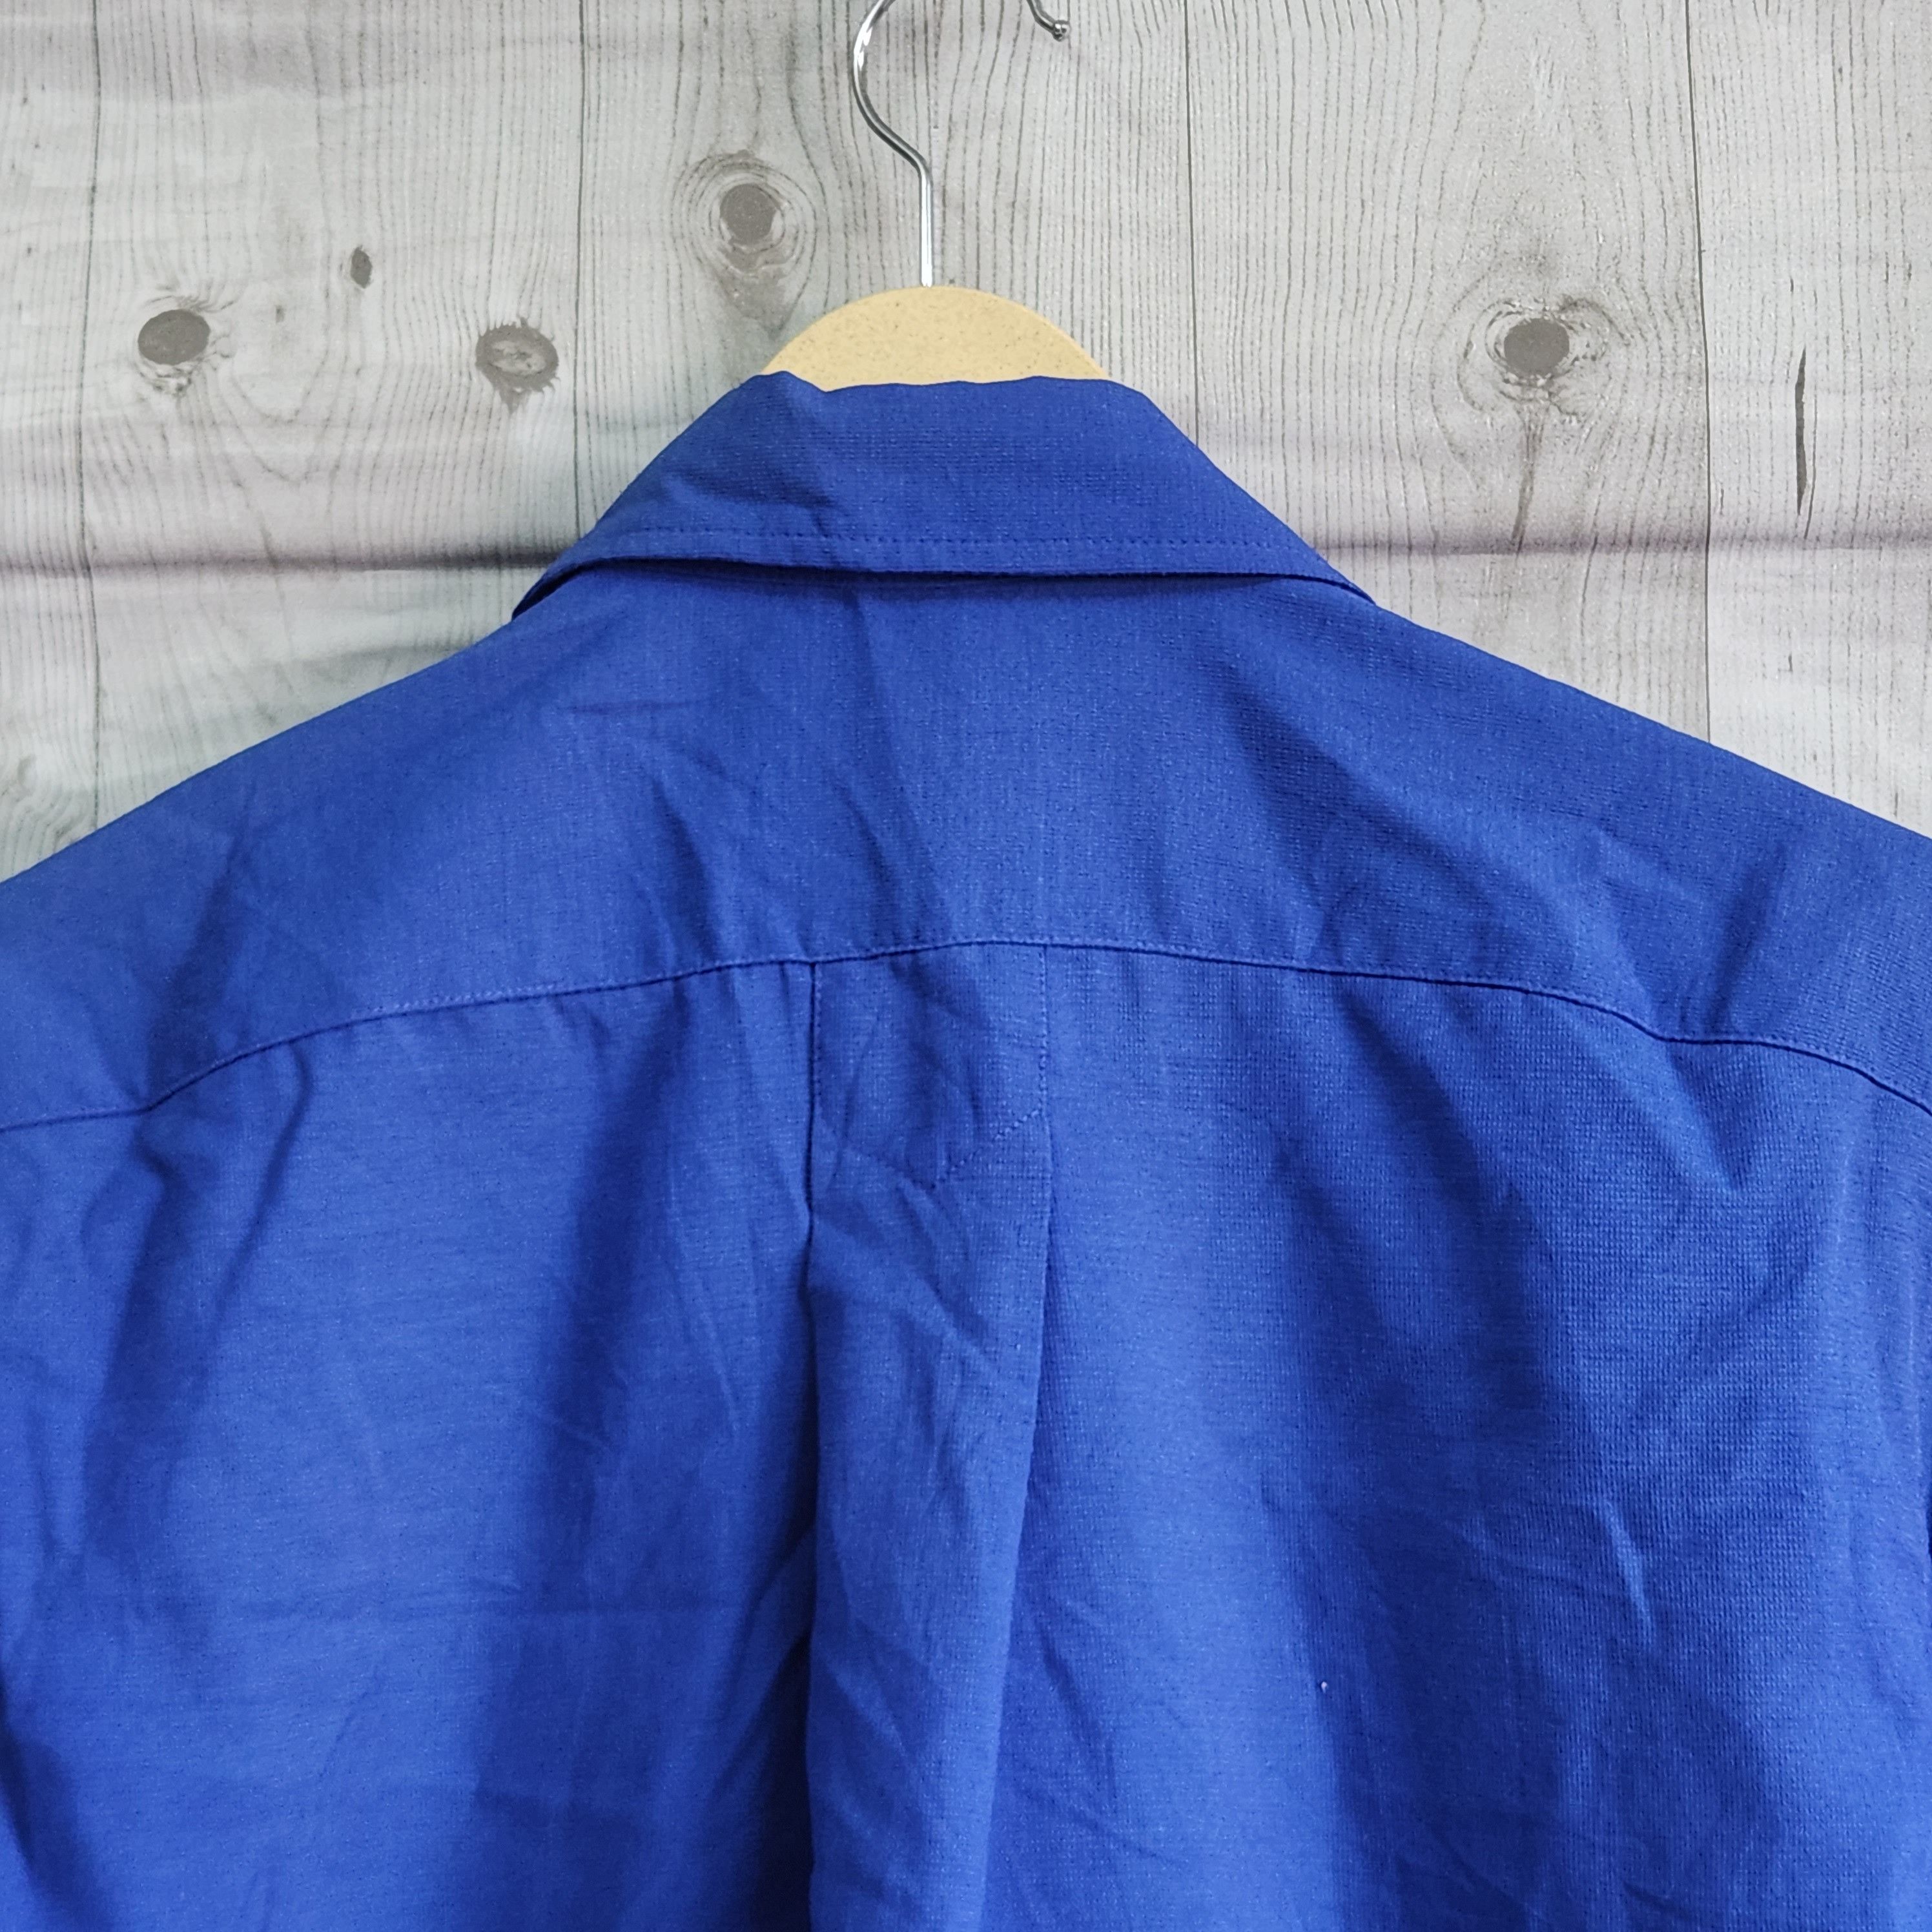 Vintage Japan ENEOS Workers Outlet Shirts - 9